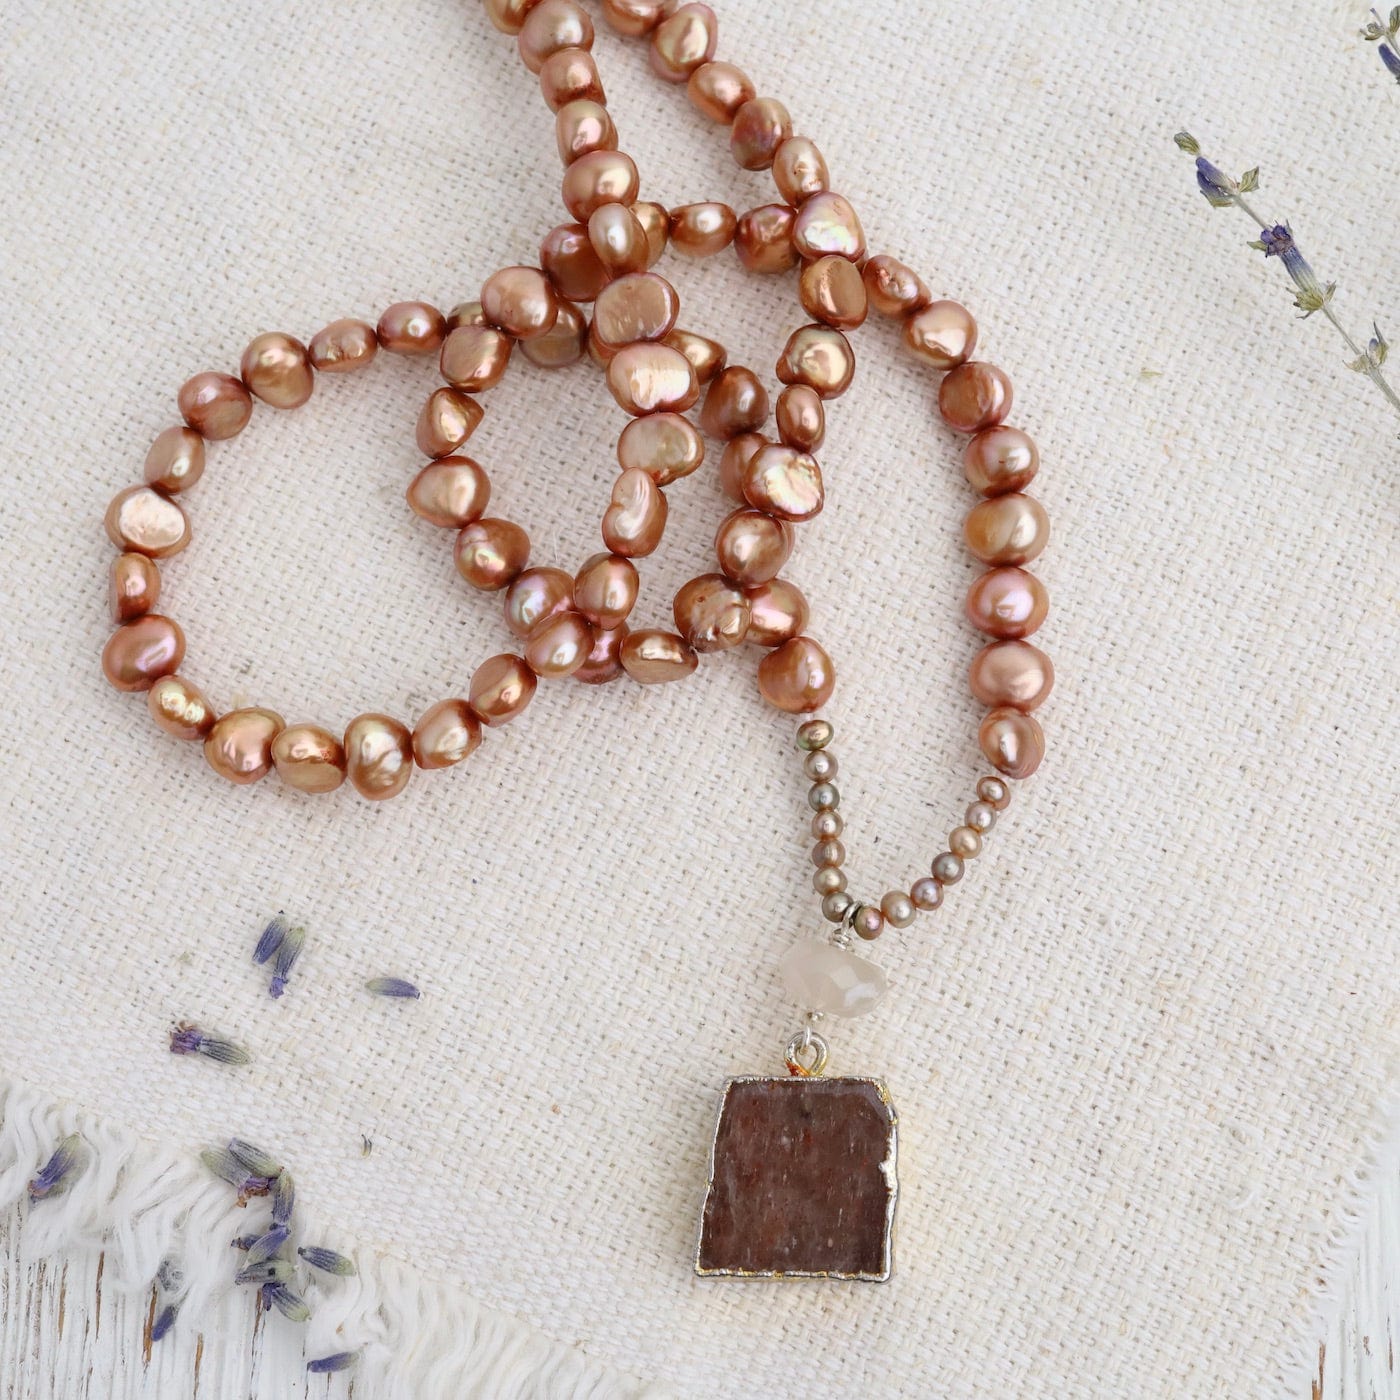 NKL Copper Pearls with Red Aventurine Necklace